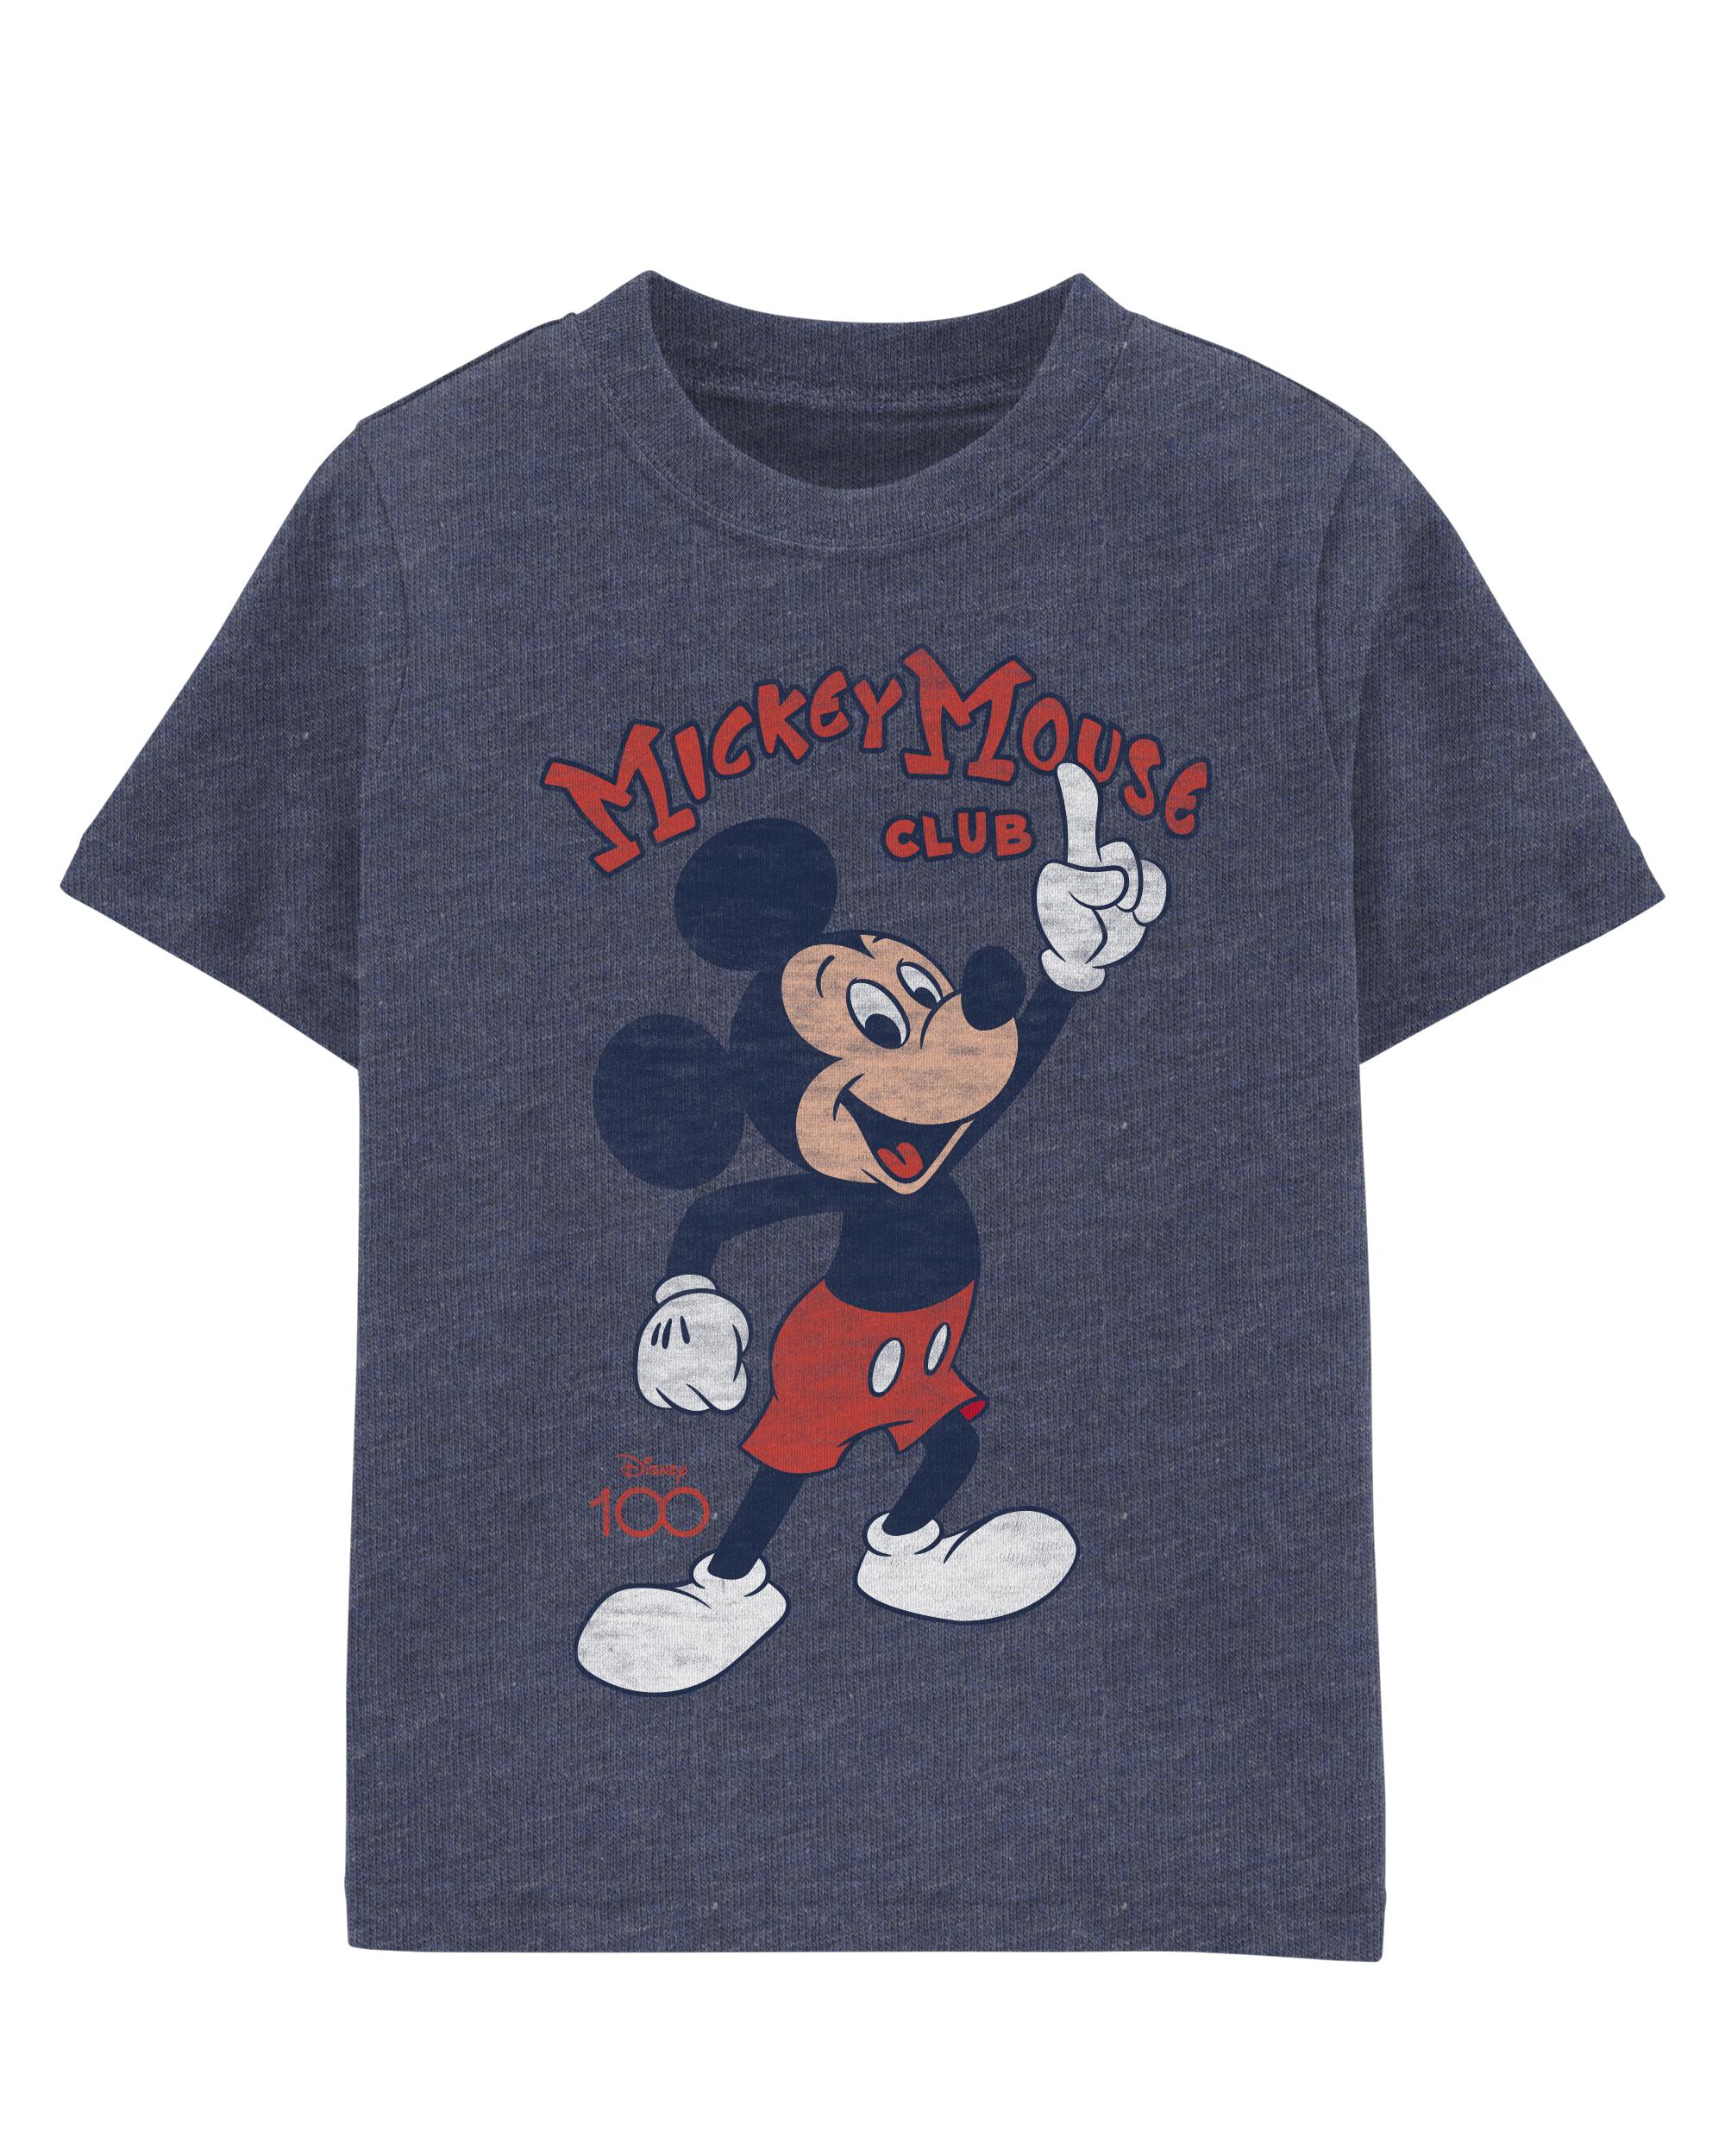 Toddler Mickey Mouse Club Tee